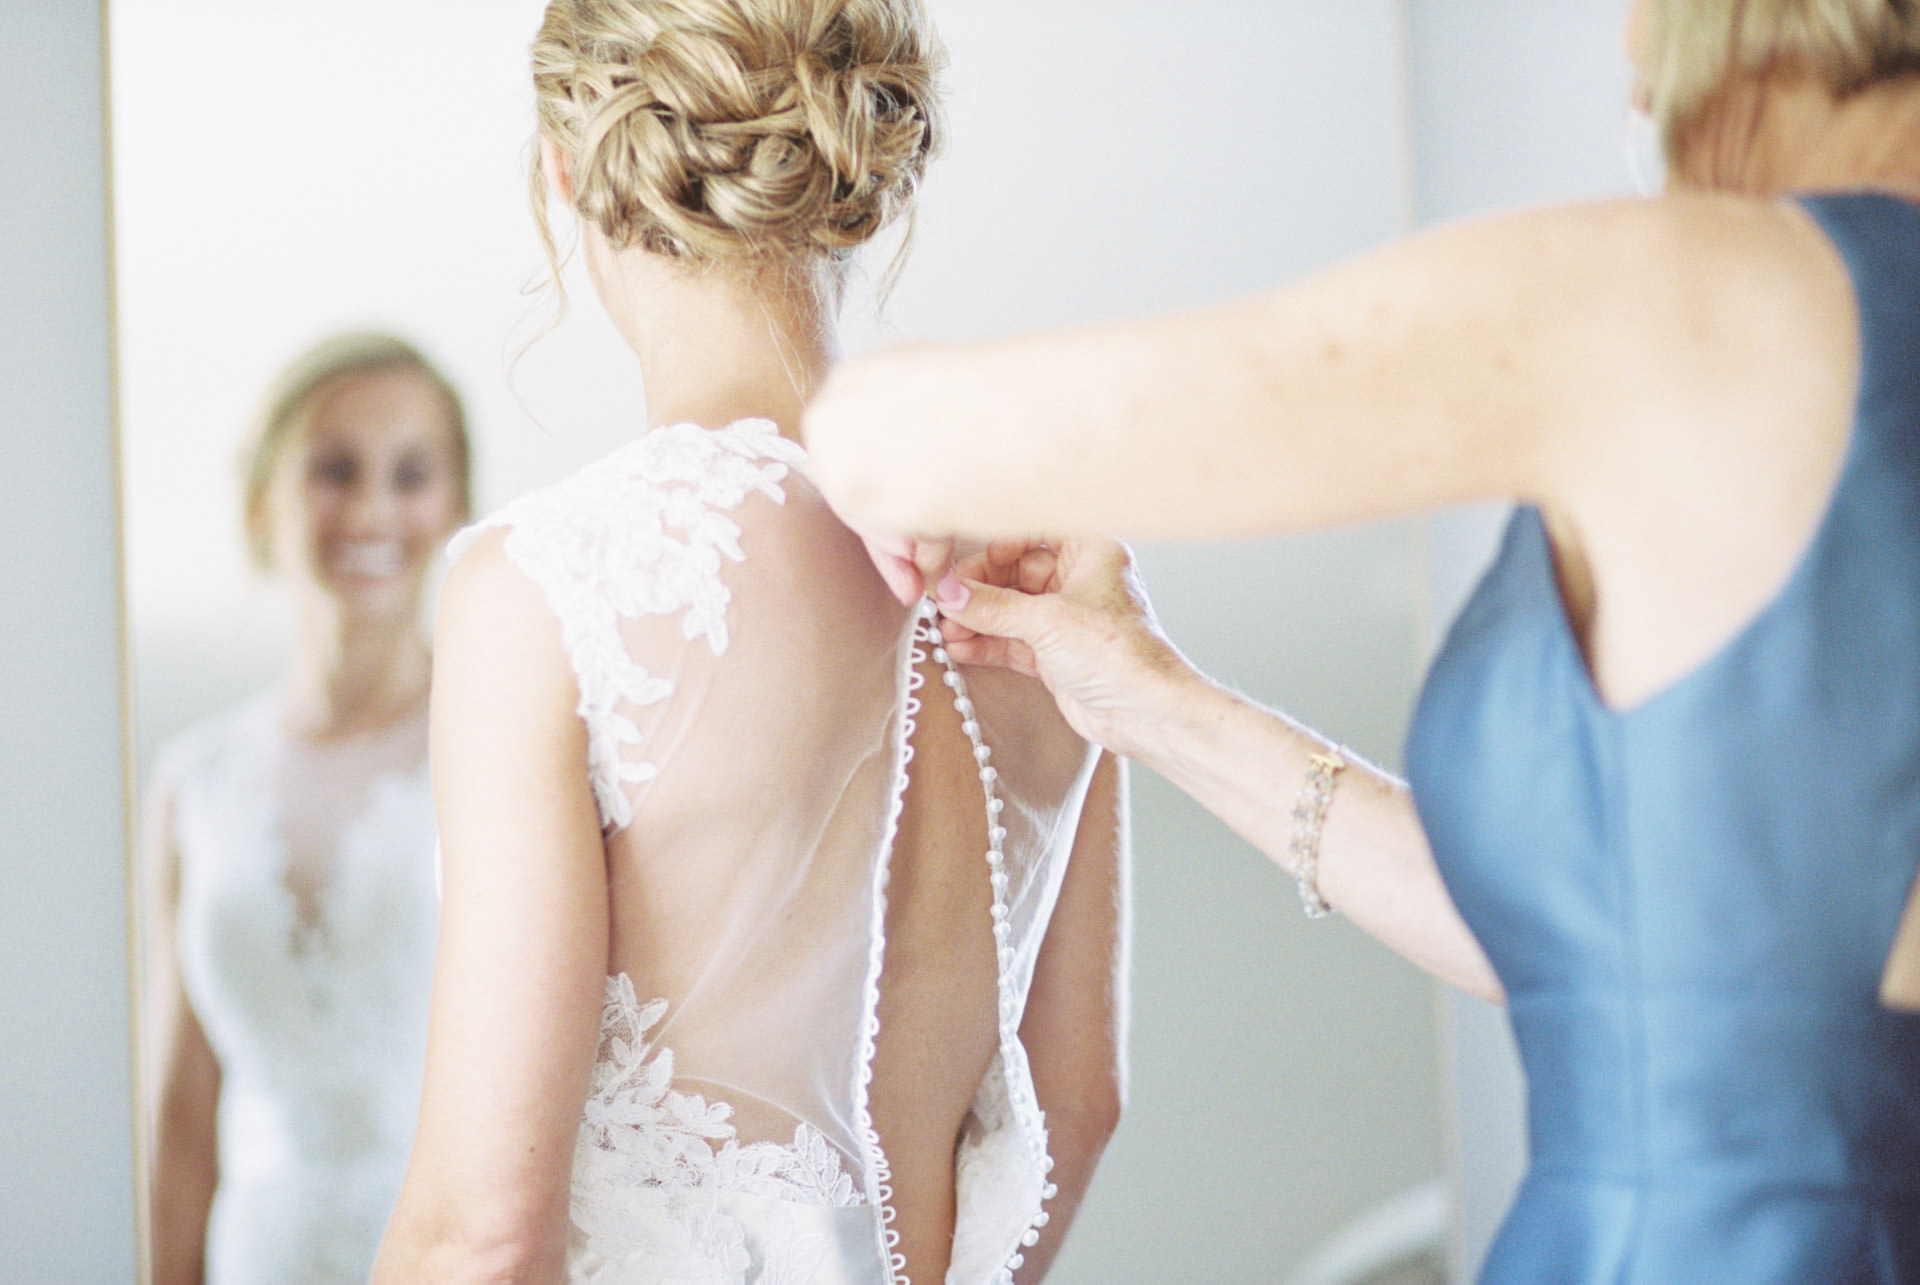 Bride photographed in her dress at her Cape Cod wedding at the The Coonamessett Inn in Falmouth, MA